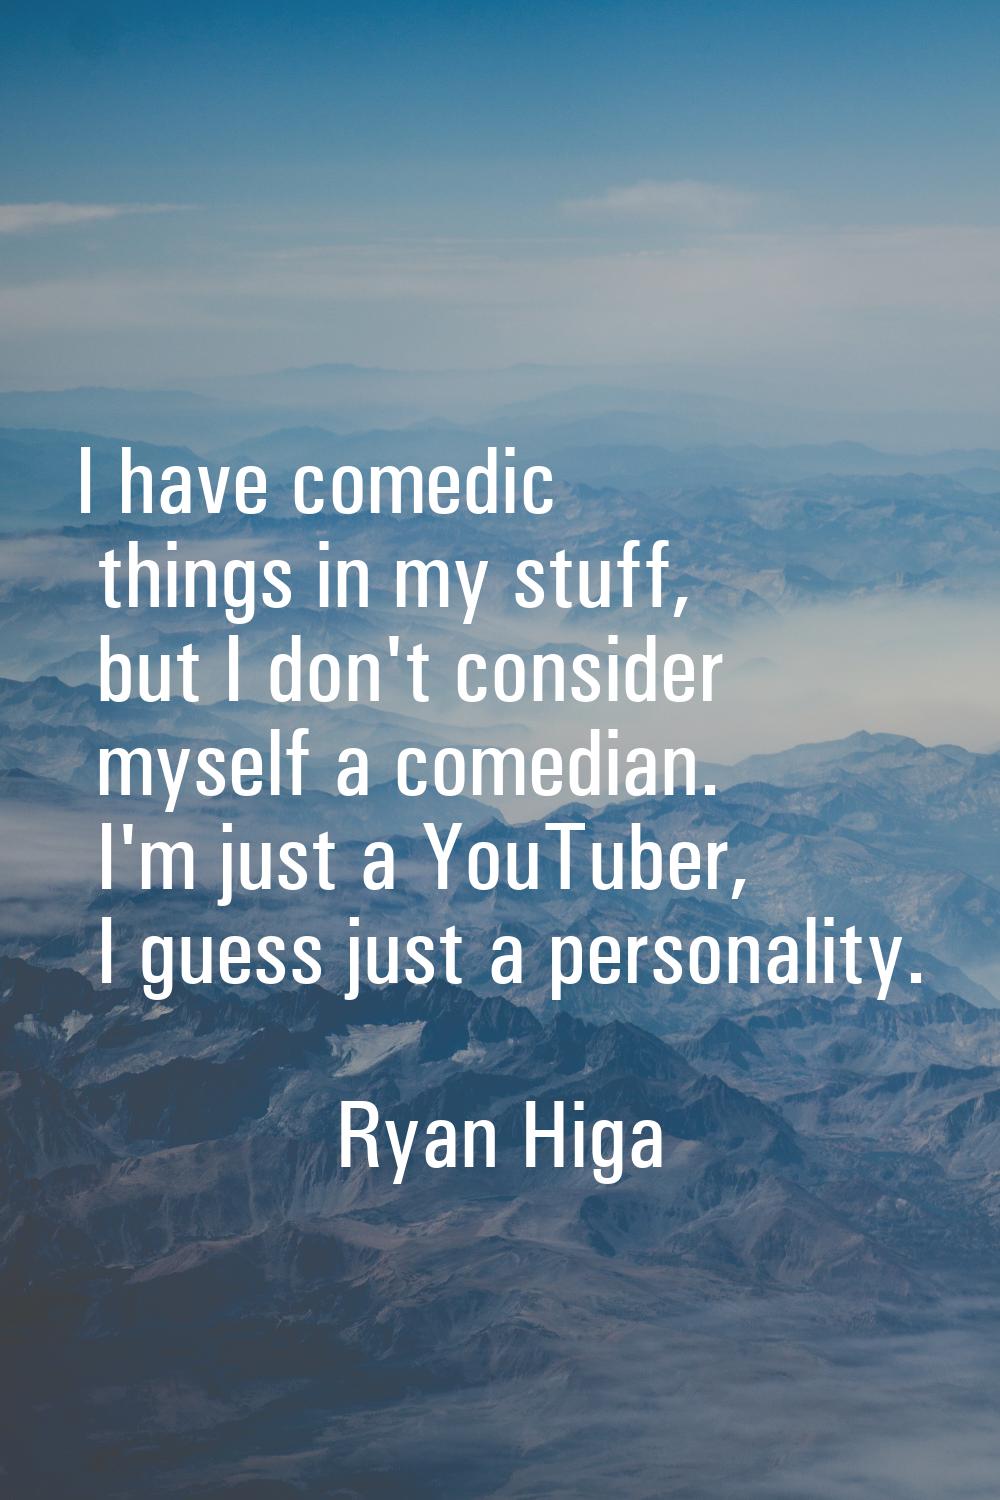 I have comedic things in my stuff, but I don't consider myself a comedian. I'm just a YouTuber, I g